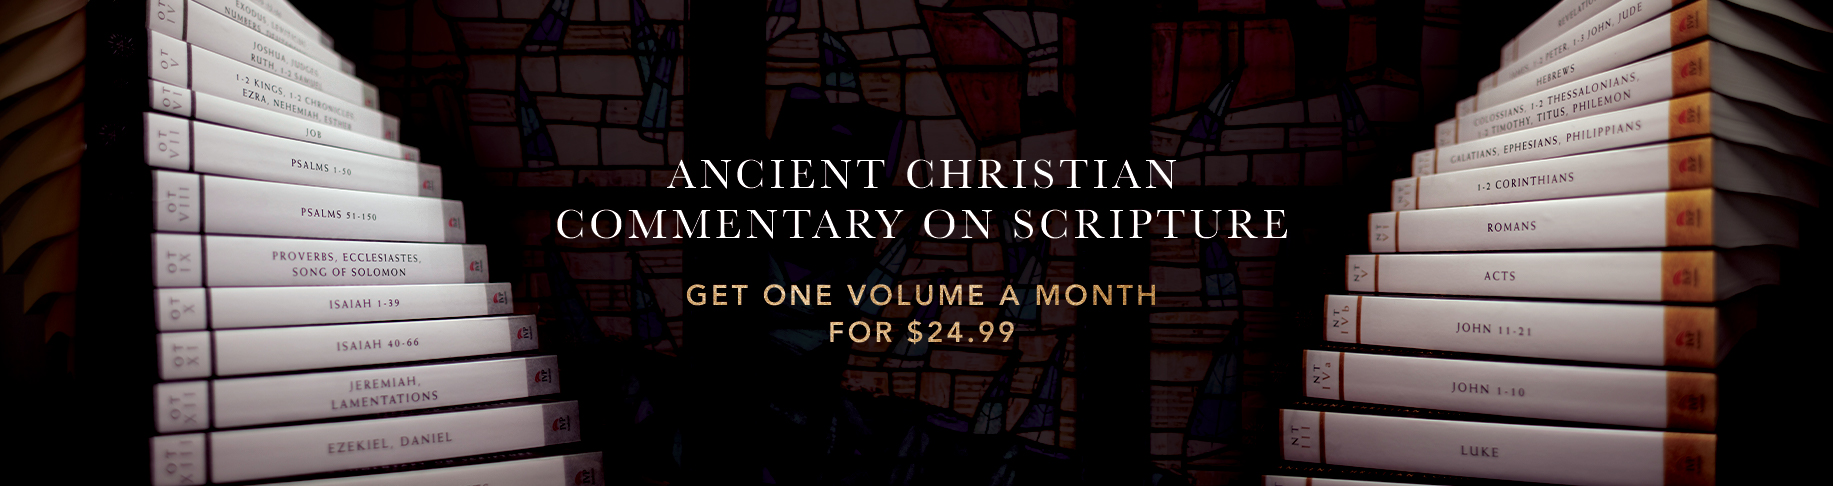 Ancient Christian Commentary on Scripture Program